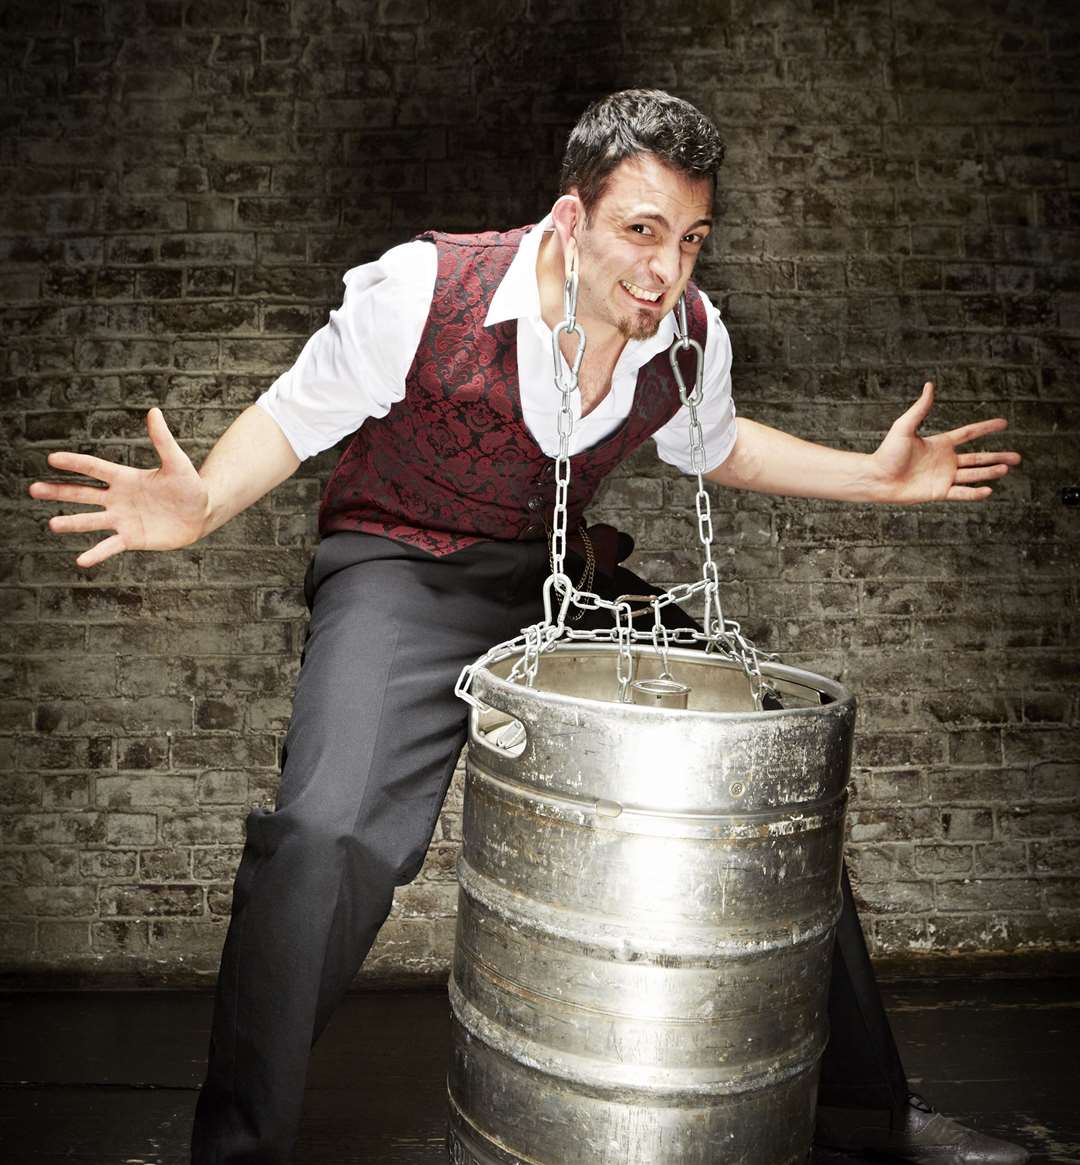 Johnny Strange from Dartford carrying a barrel using his ears. Photo: Paul Michael Hughes/ Guinness World Records